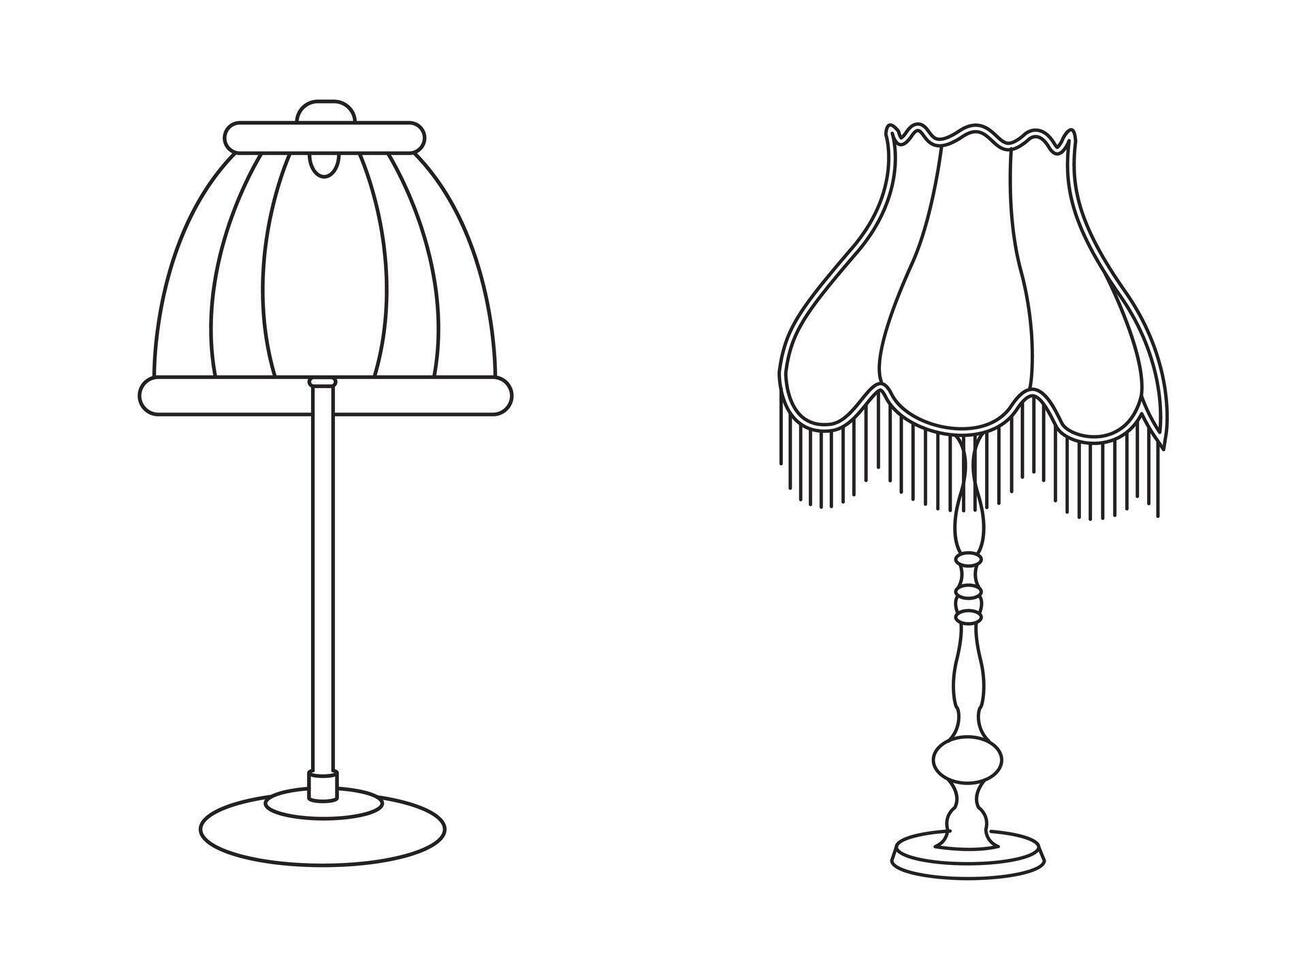 Stylish lamp, Modern lamp interior in bedroom, Electric table, floor lamps, lampshades, Different interior light decor standing and hanging. vector